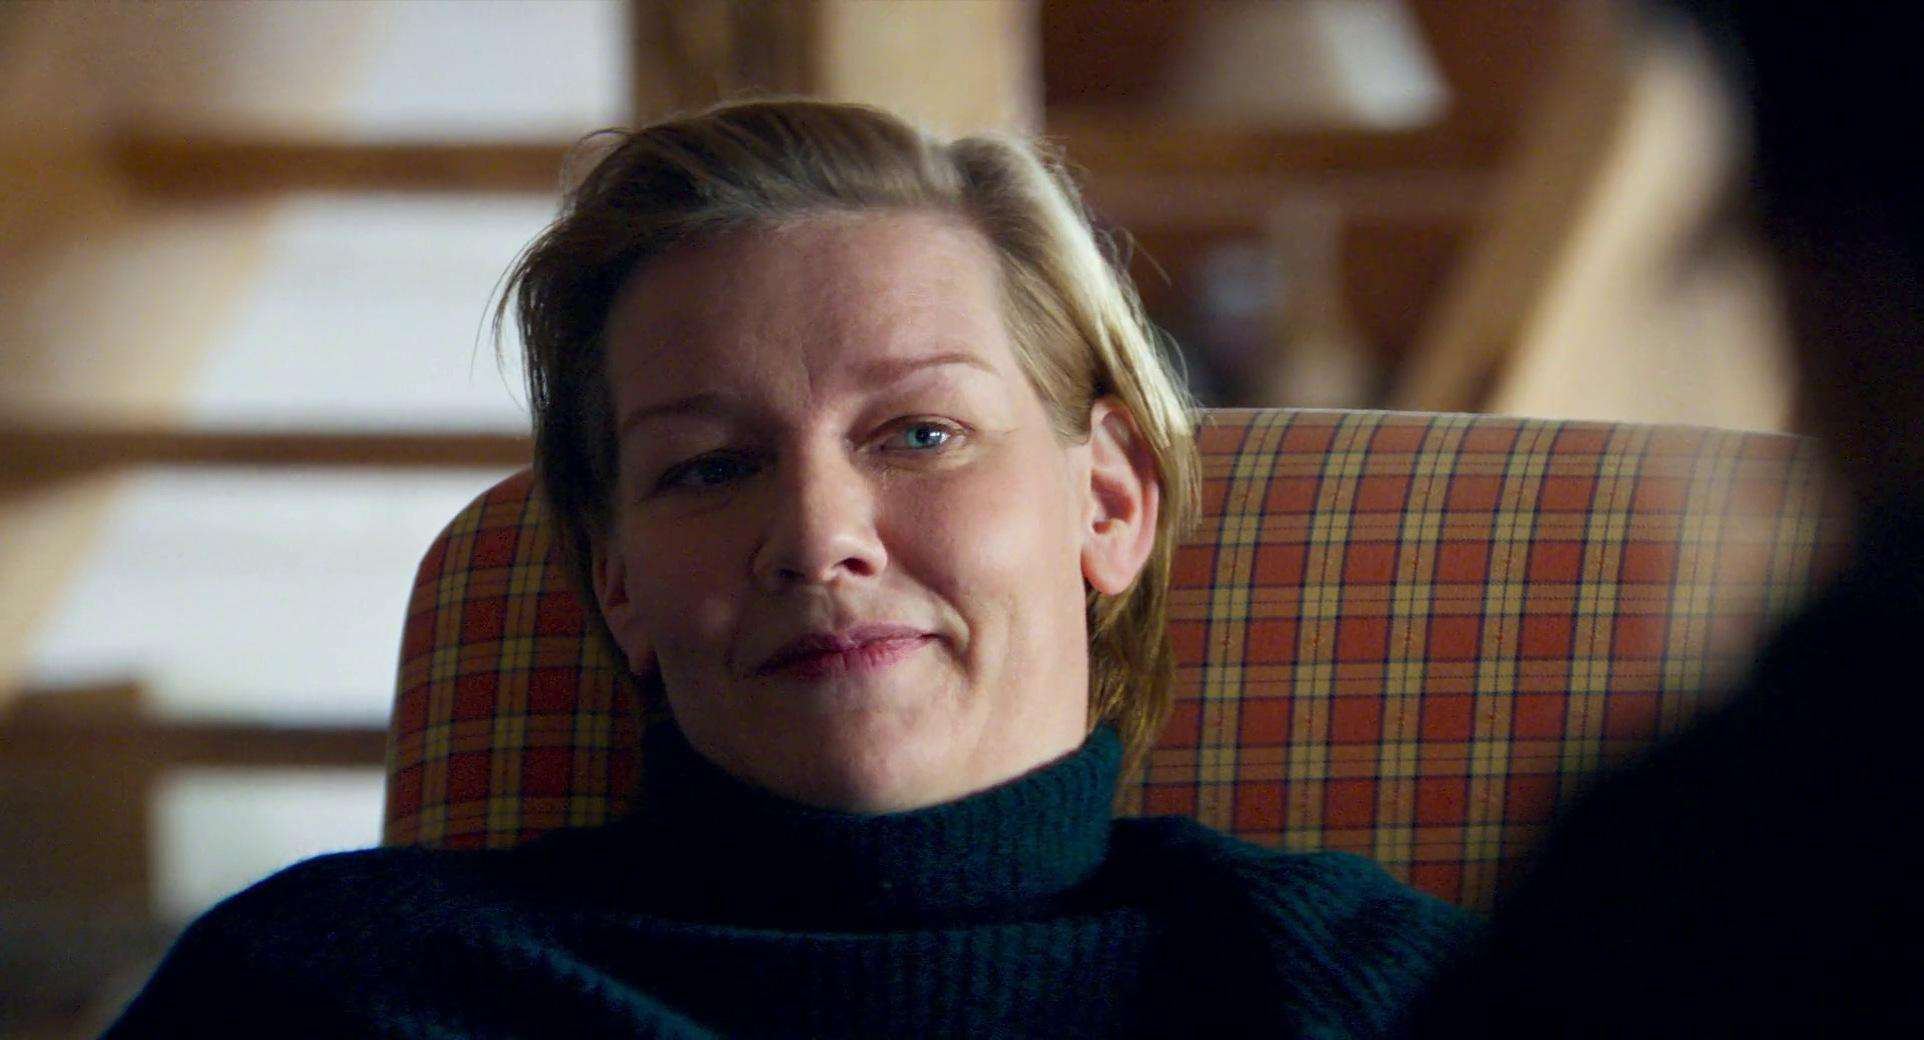 A short-haired woman smiles in an armchair in this image from Les Films Pelléas.